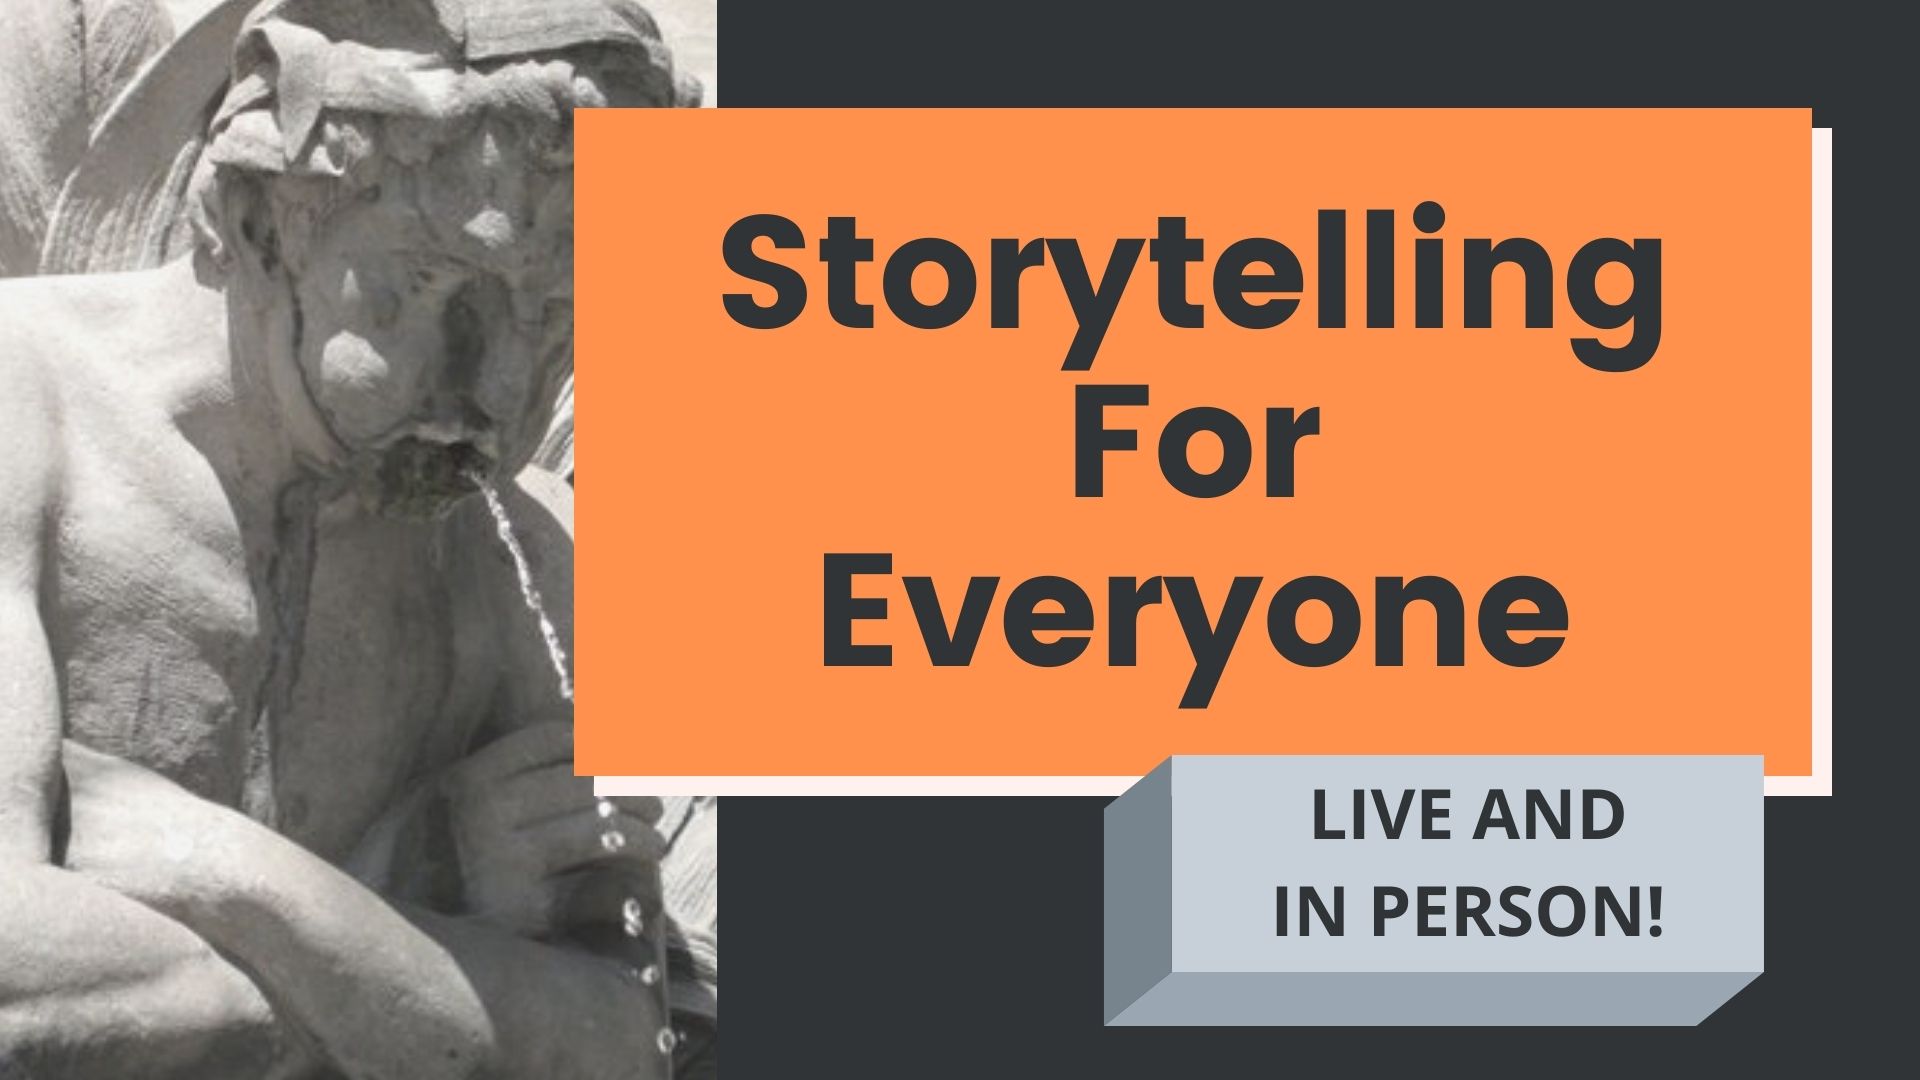 Storytelling For Everyone: Four Week Course in Personal Narrative (Mondays In Nov/Dec) IN PERSON!!!